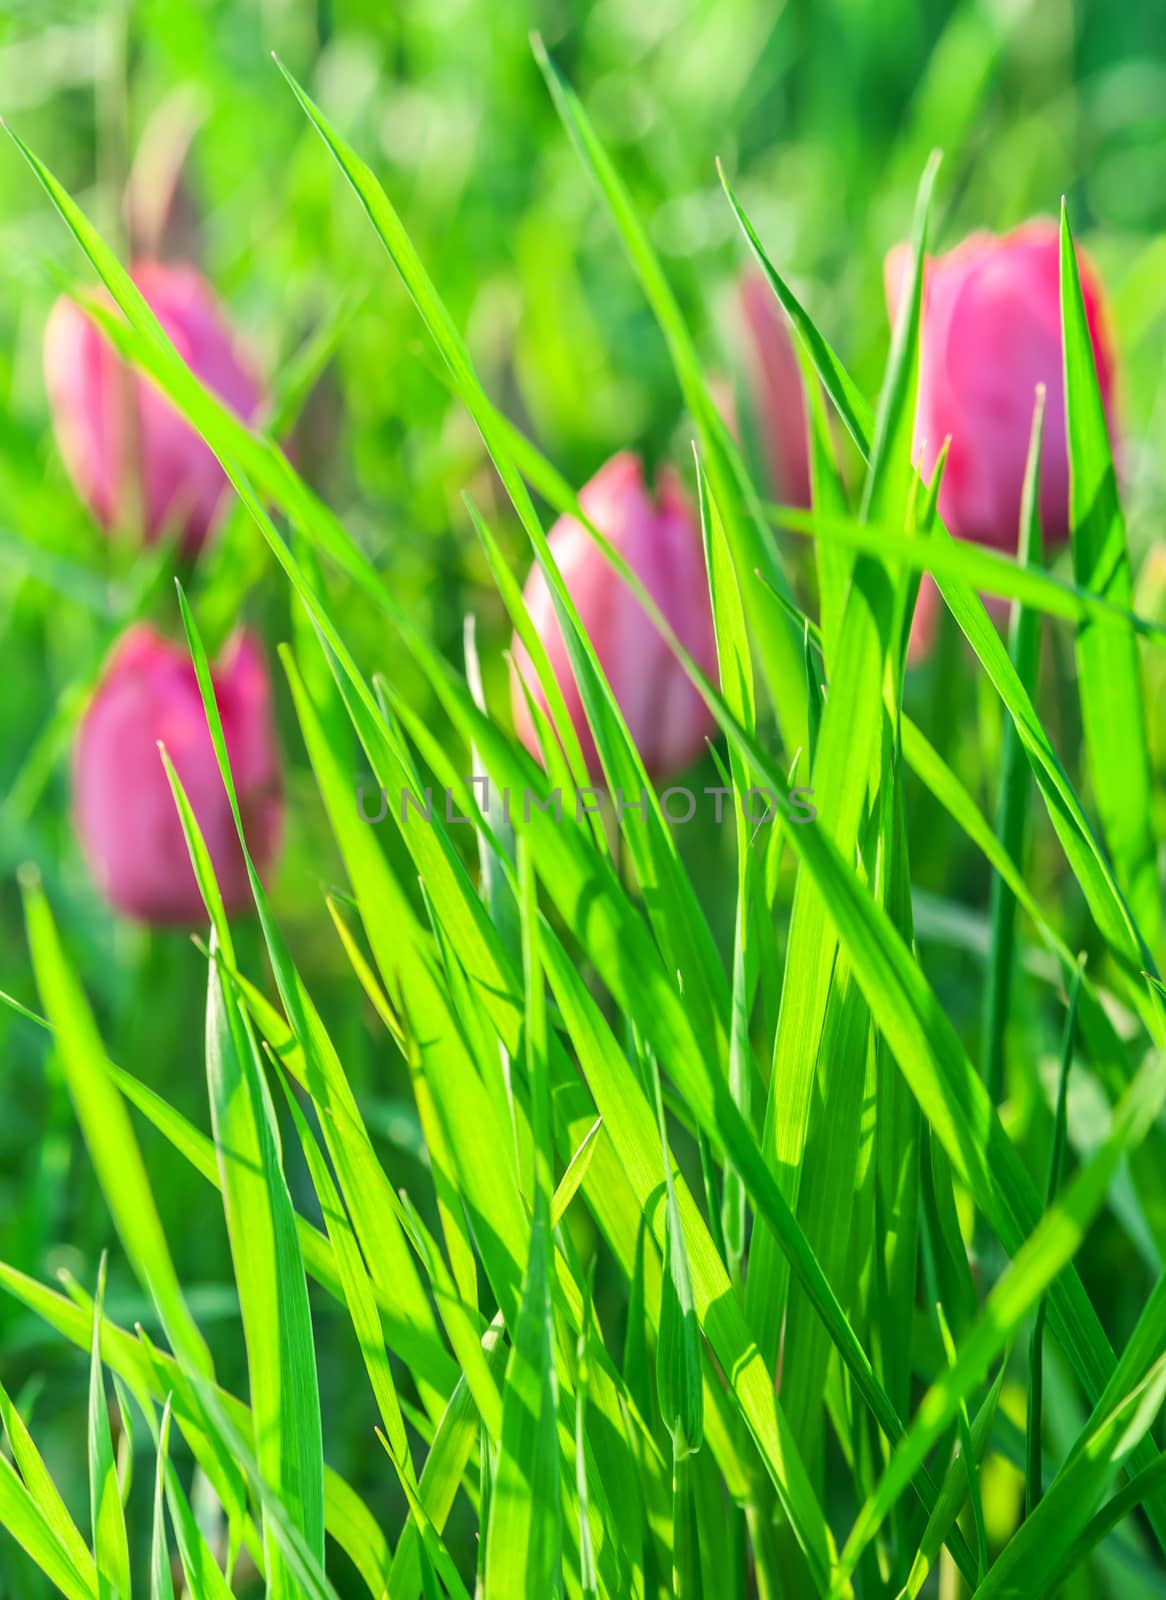 Green grass on a background of pink tulips